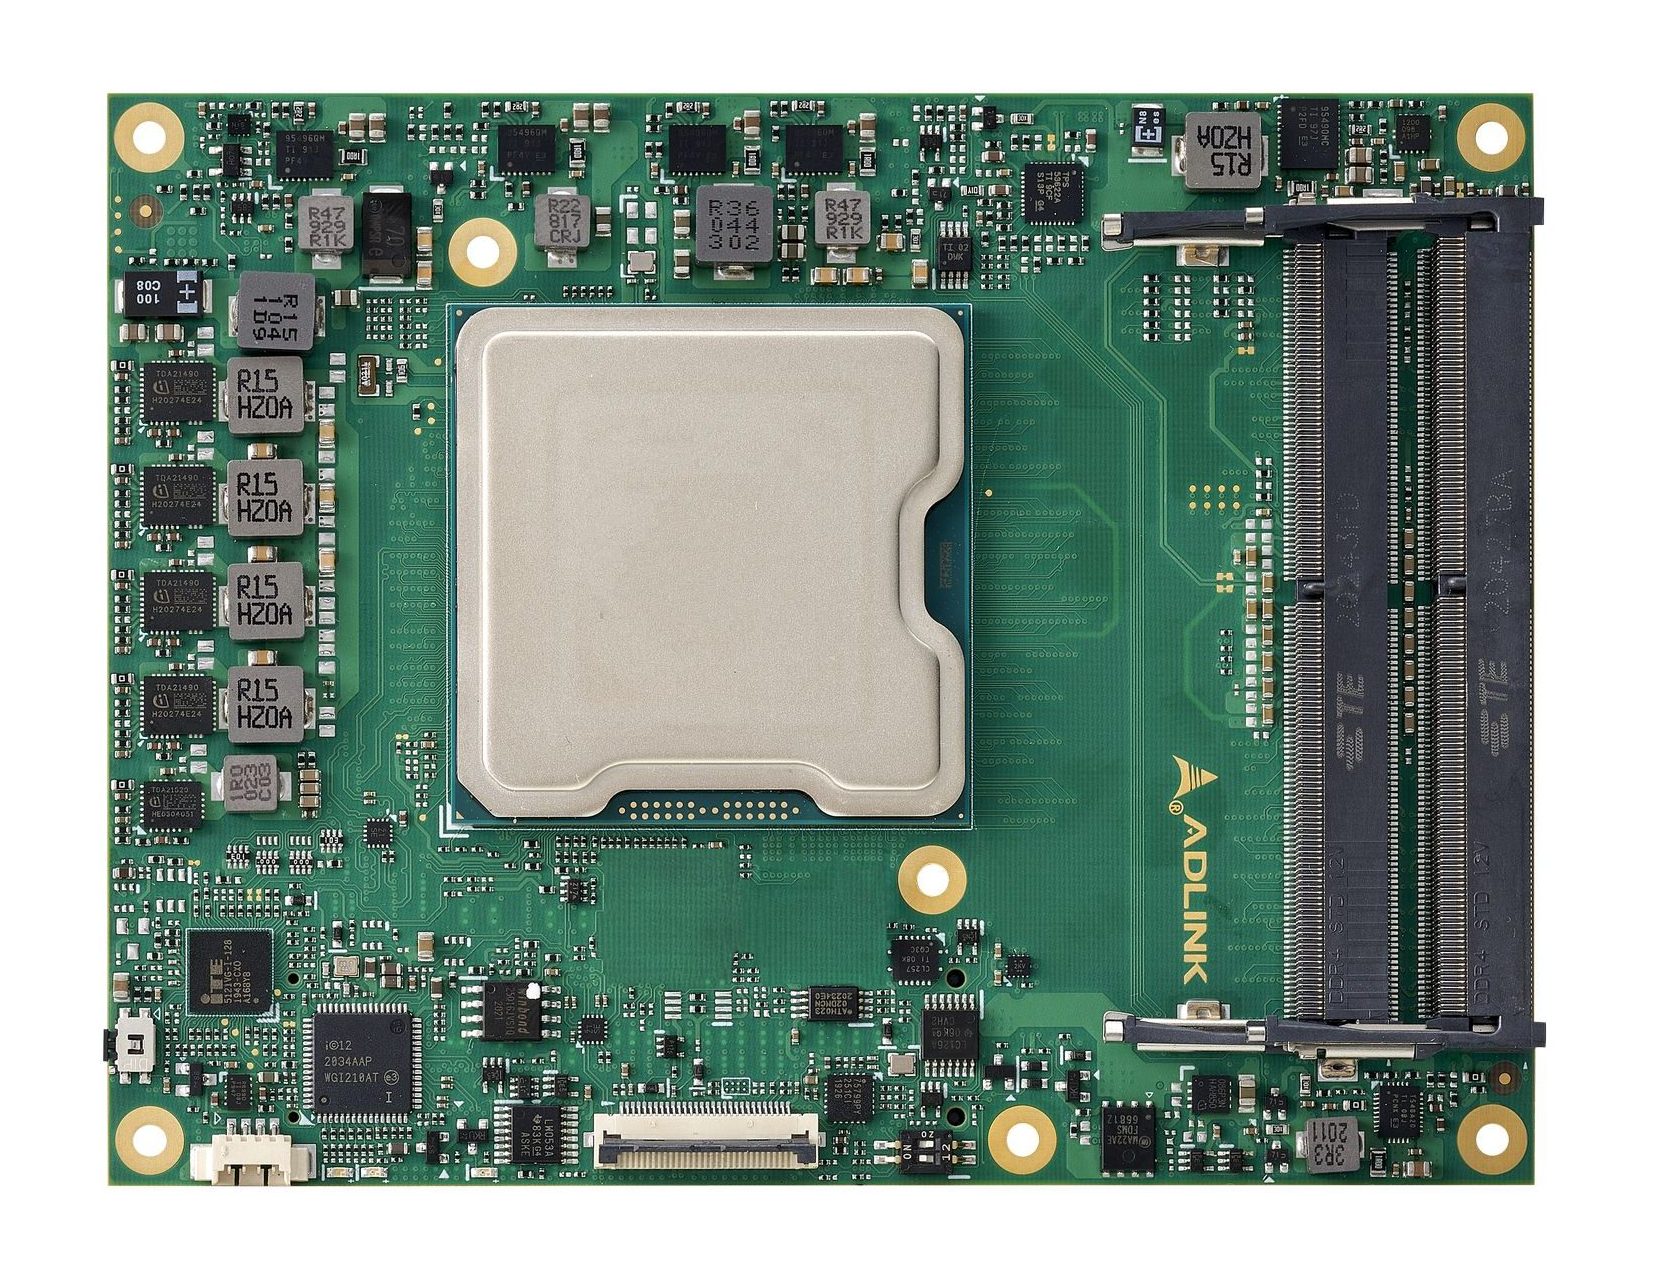 ADLINK presents Edge server-class COM-HPC Server Type and COM Express Type 7 Modules powered by the latest Intel® Xeon® D processors